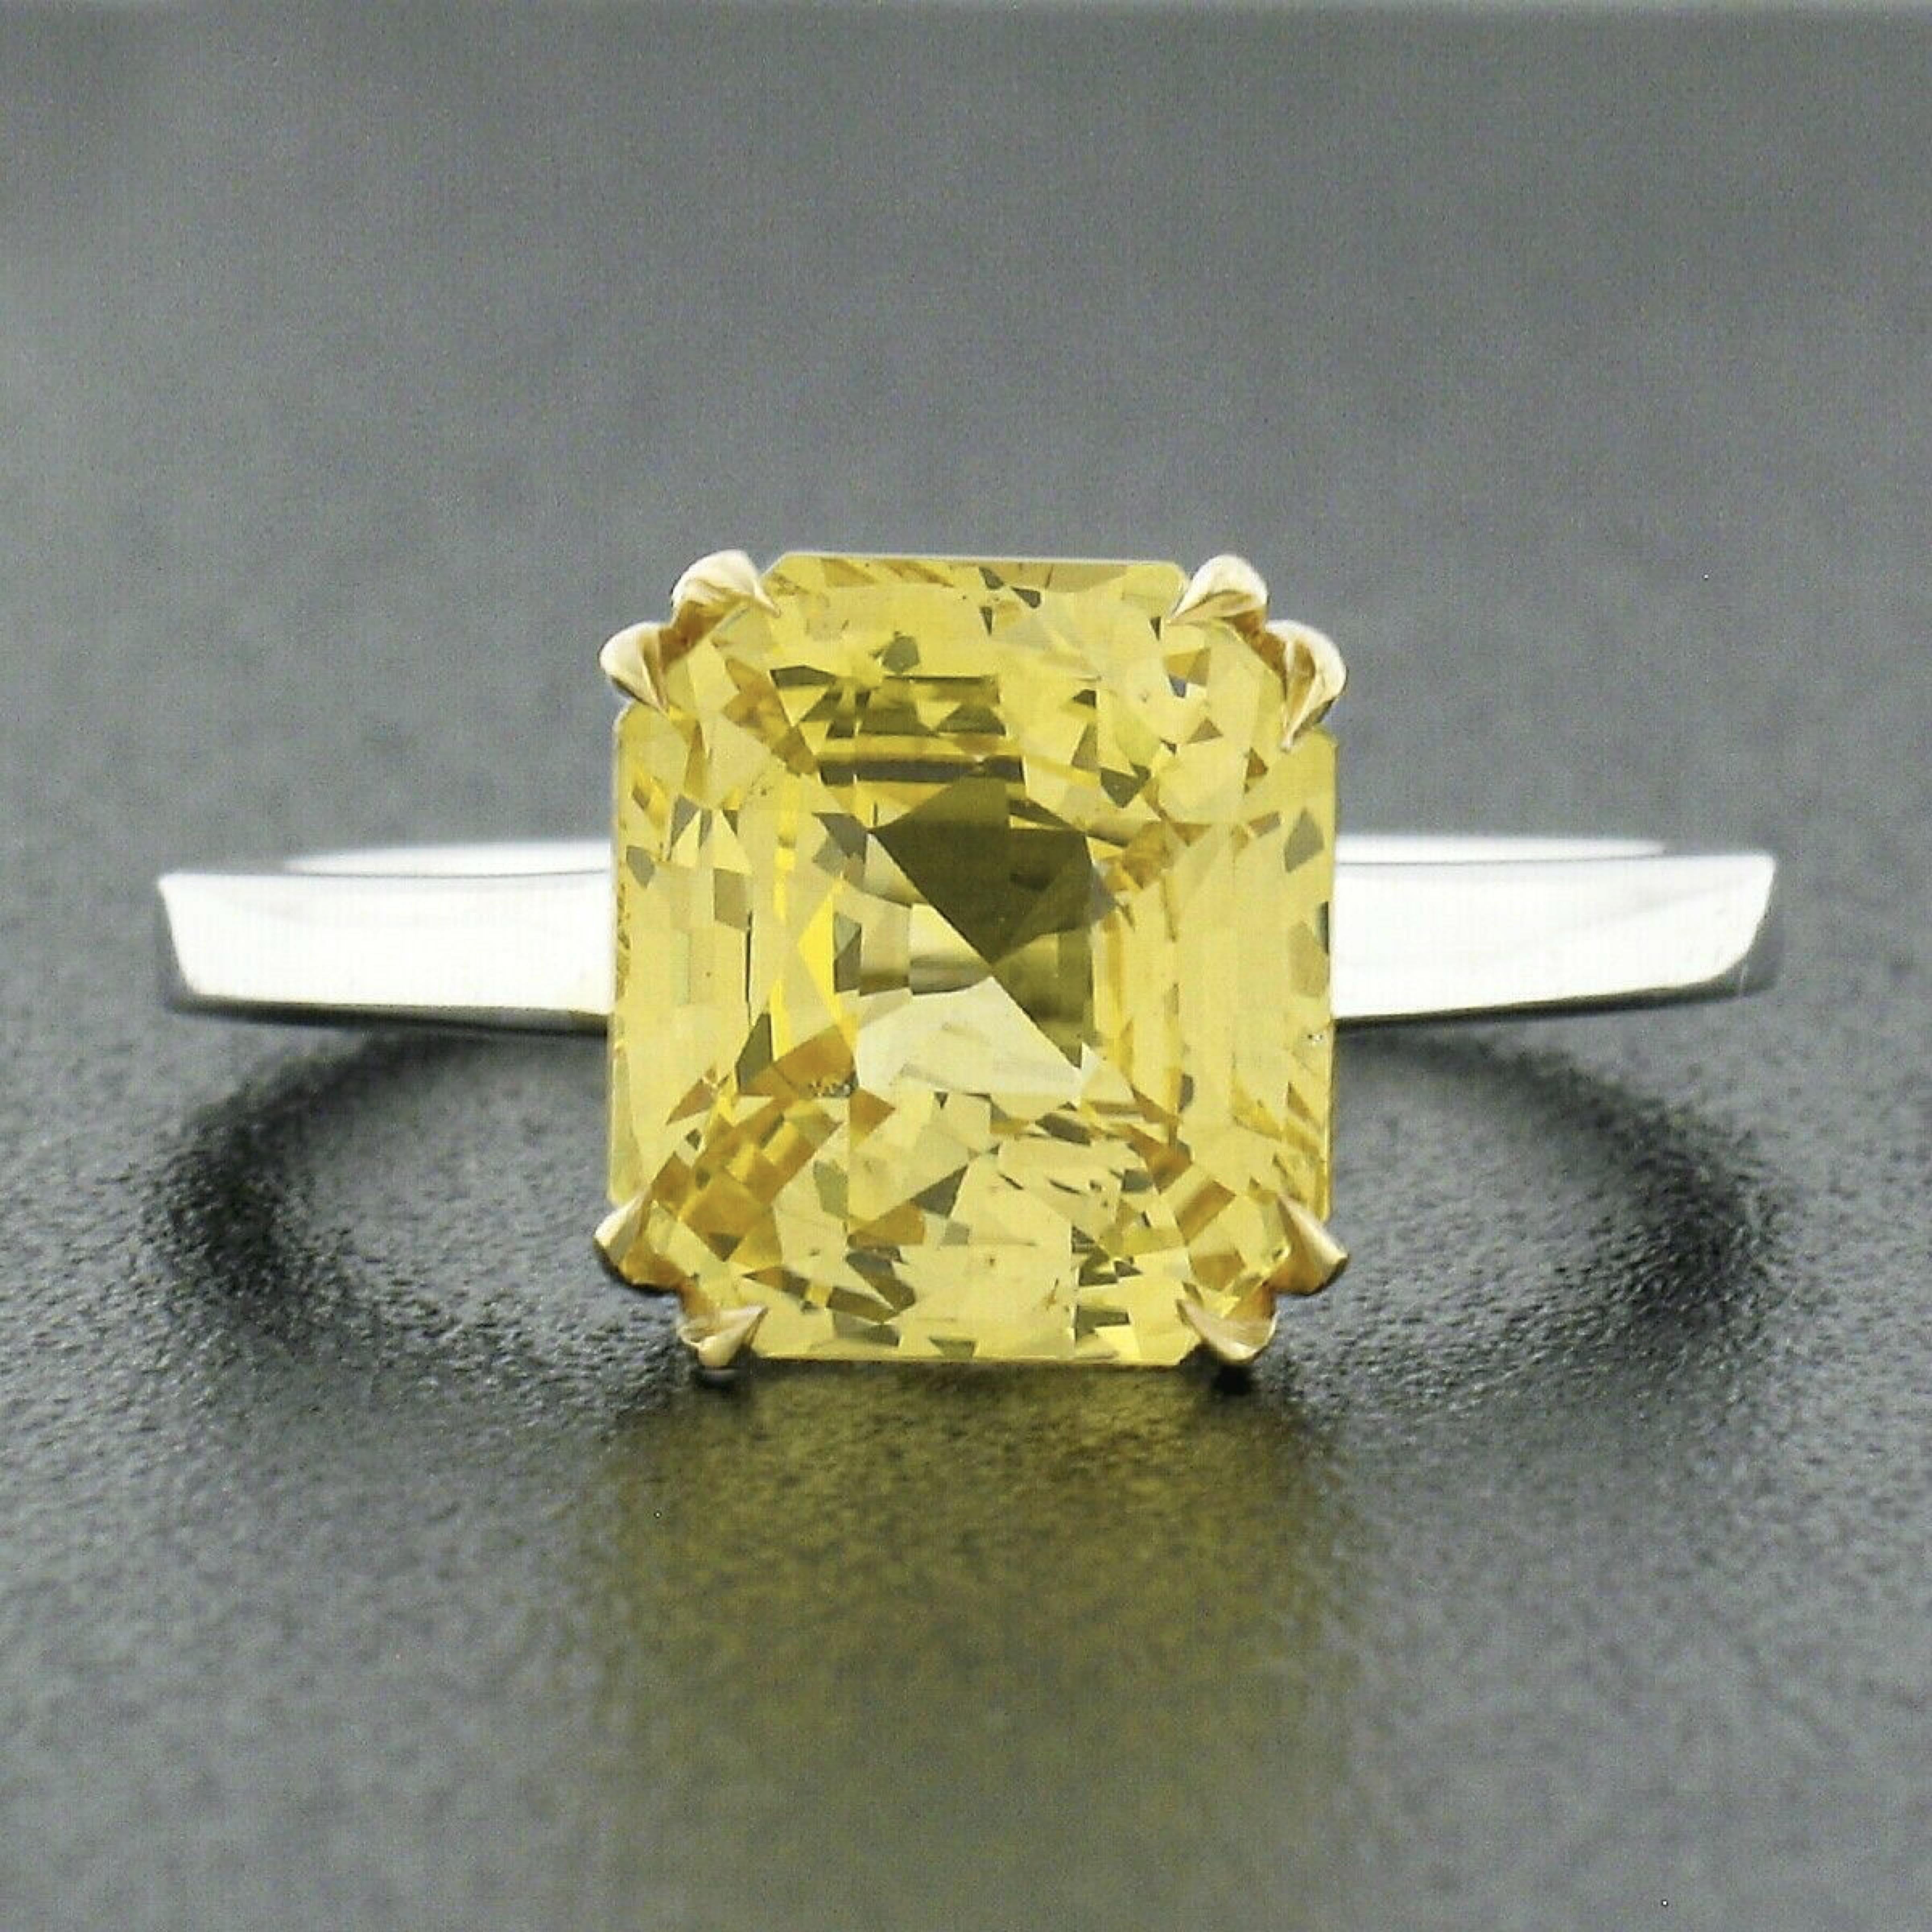 Here we have a truly magnificent yellow sapphire solitaire ring newly crafted from solid 18k yellow and white gold. The ring features a natural, GIA certified, brilliant cut yellow sapphire that weighs exactly 4.09 carats and is perfectly dual